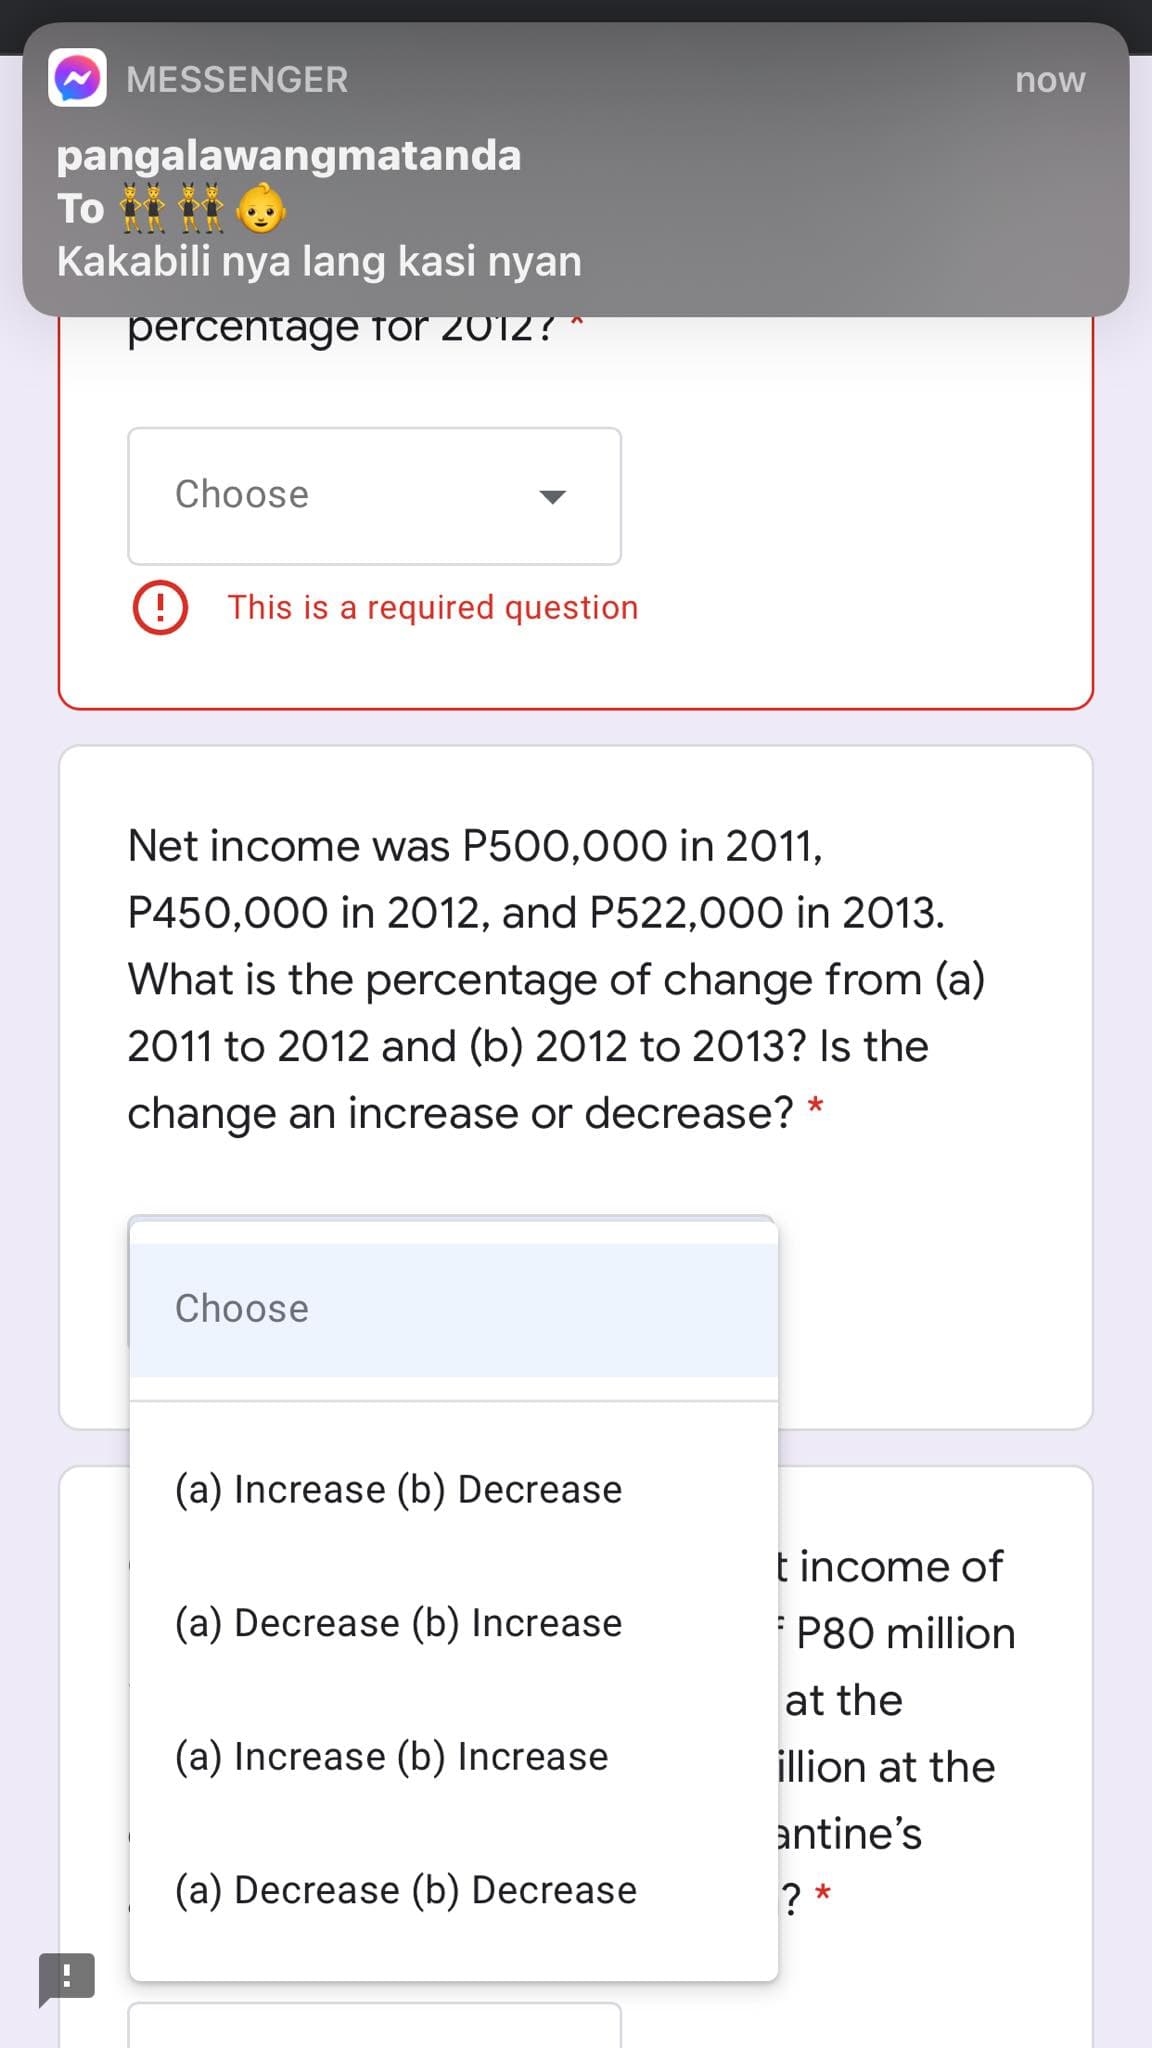 MESSENGER
now
pangalawangmatanda
To i
Kakabili nya lang kasi nyan
percentage for 2012? *
Choose
This is a required question
Net income was P500,000 in 2011,
P450,000 in 2012, and P522,000 in 2013.
What is the percentage of change from (a)
2011 to 2012 and (b) 2012 to 2013? Is the
change an increase or decrease? *
Choose
(a) Increase (b) Decrease
t income of
(a) Decrease (b) Increase
P80 million
at the
(a) Increase (b) Increase
illion at the
antine's
(a) Decrease (b) Decrease
? *
